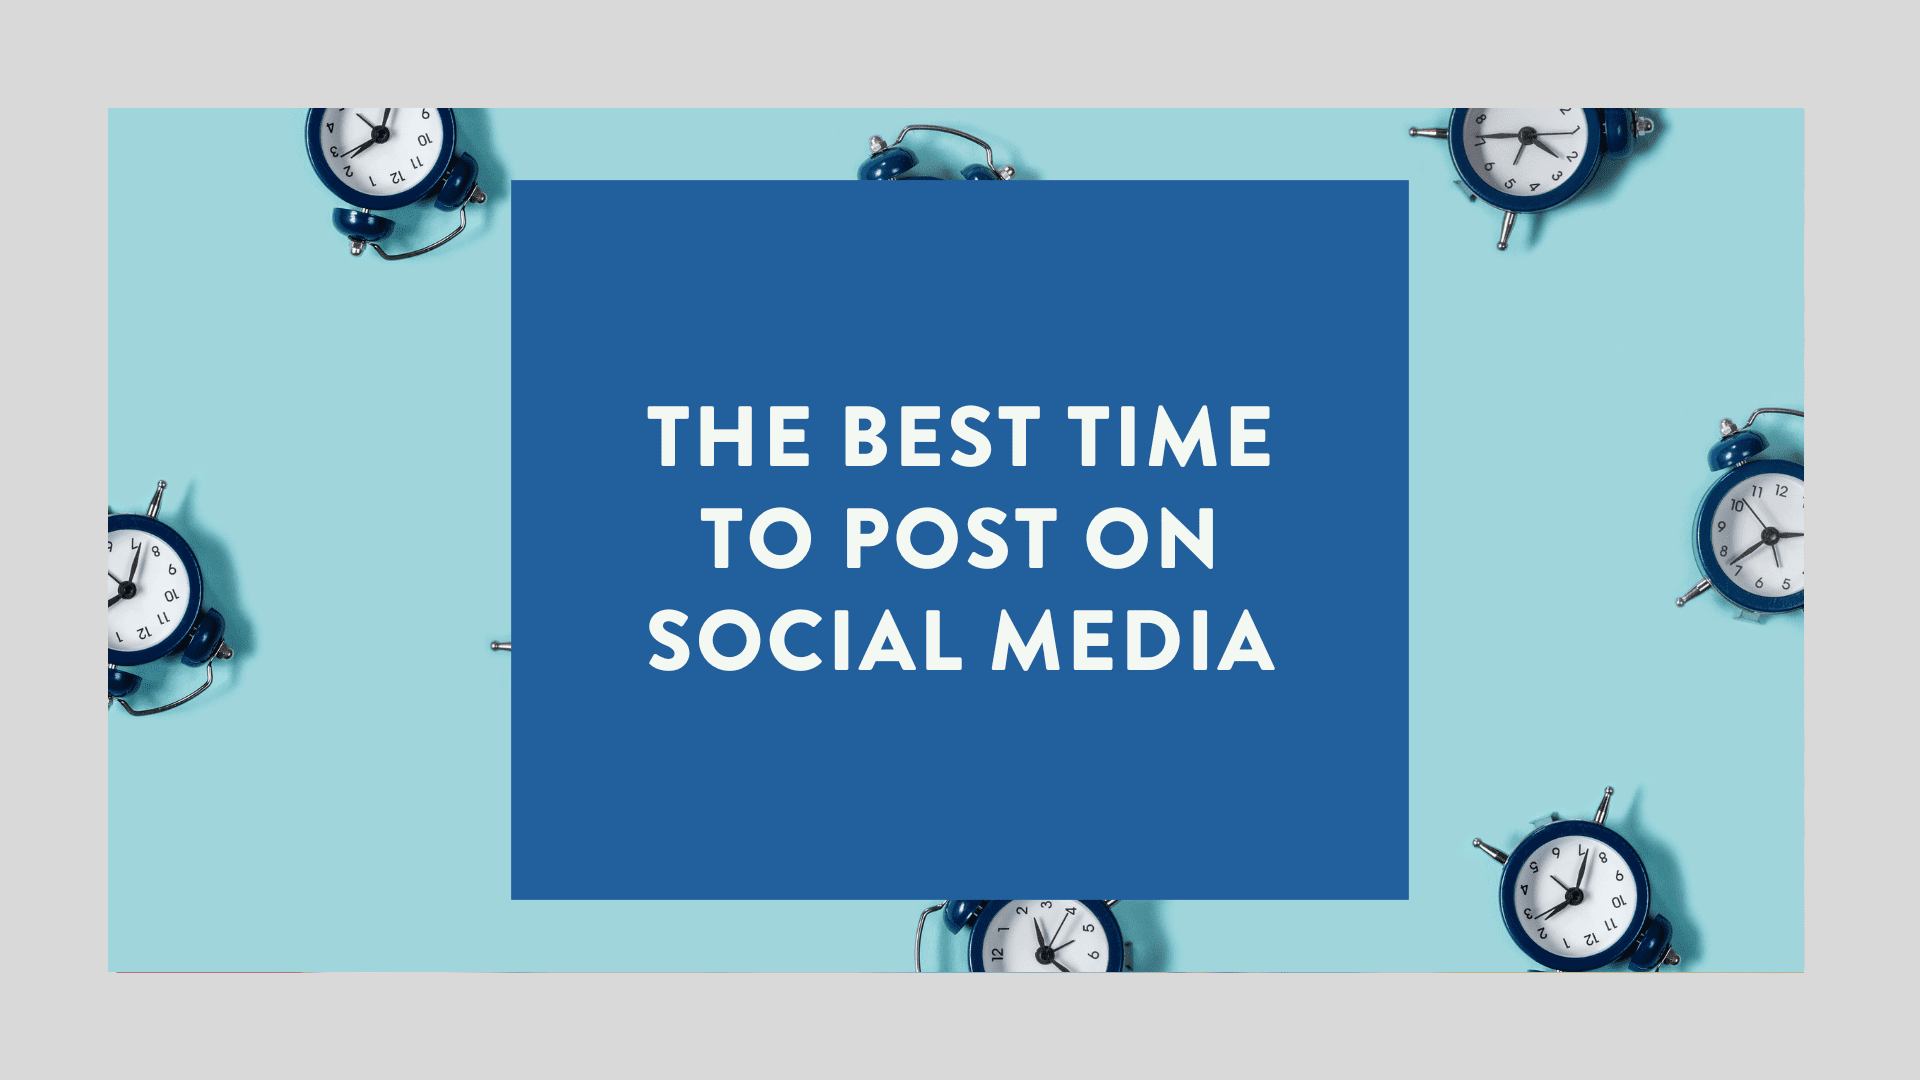 The best time to post on social media